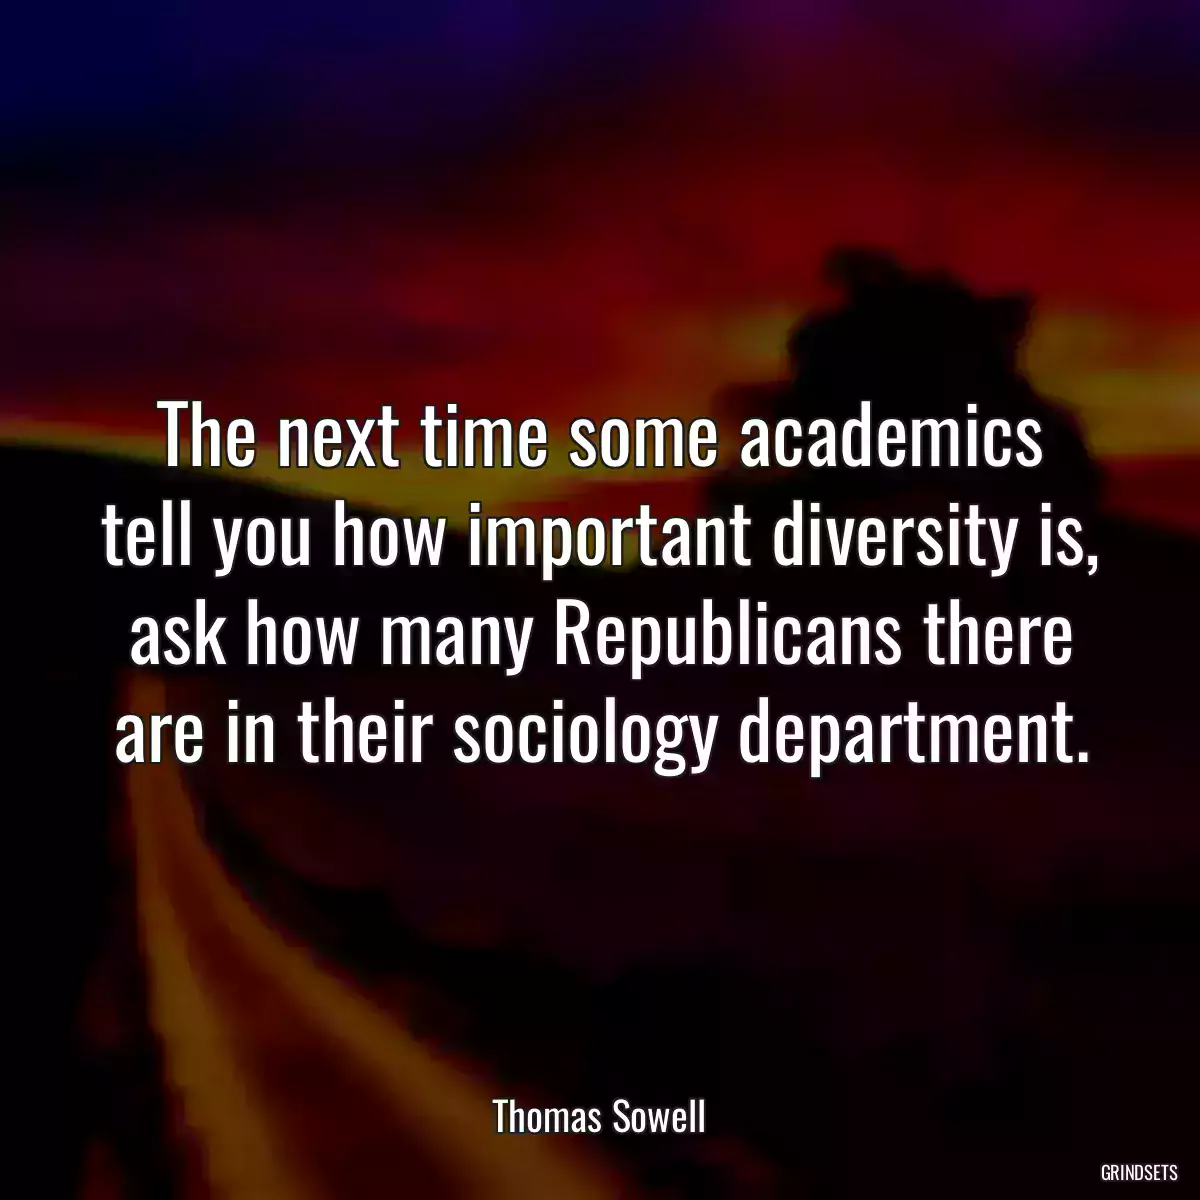 The next time some academics tell you how important diversity is, ask how many Republicans there are in their sociology department.